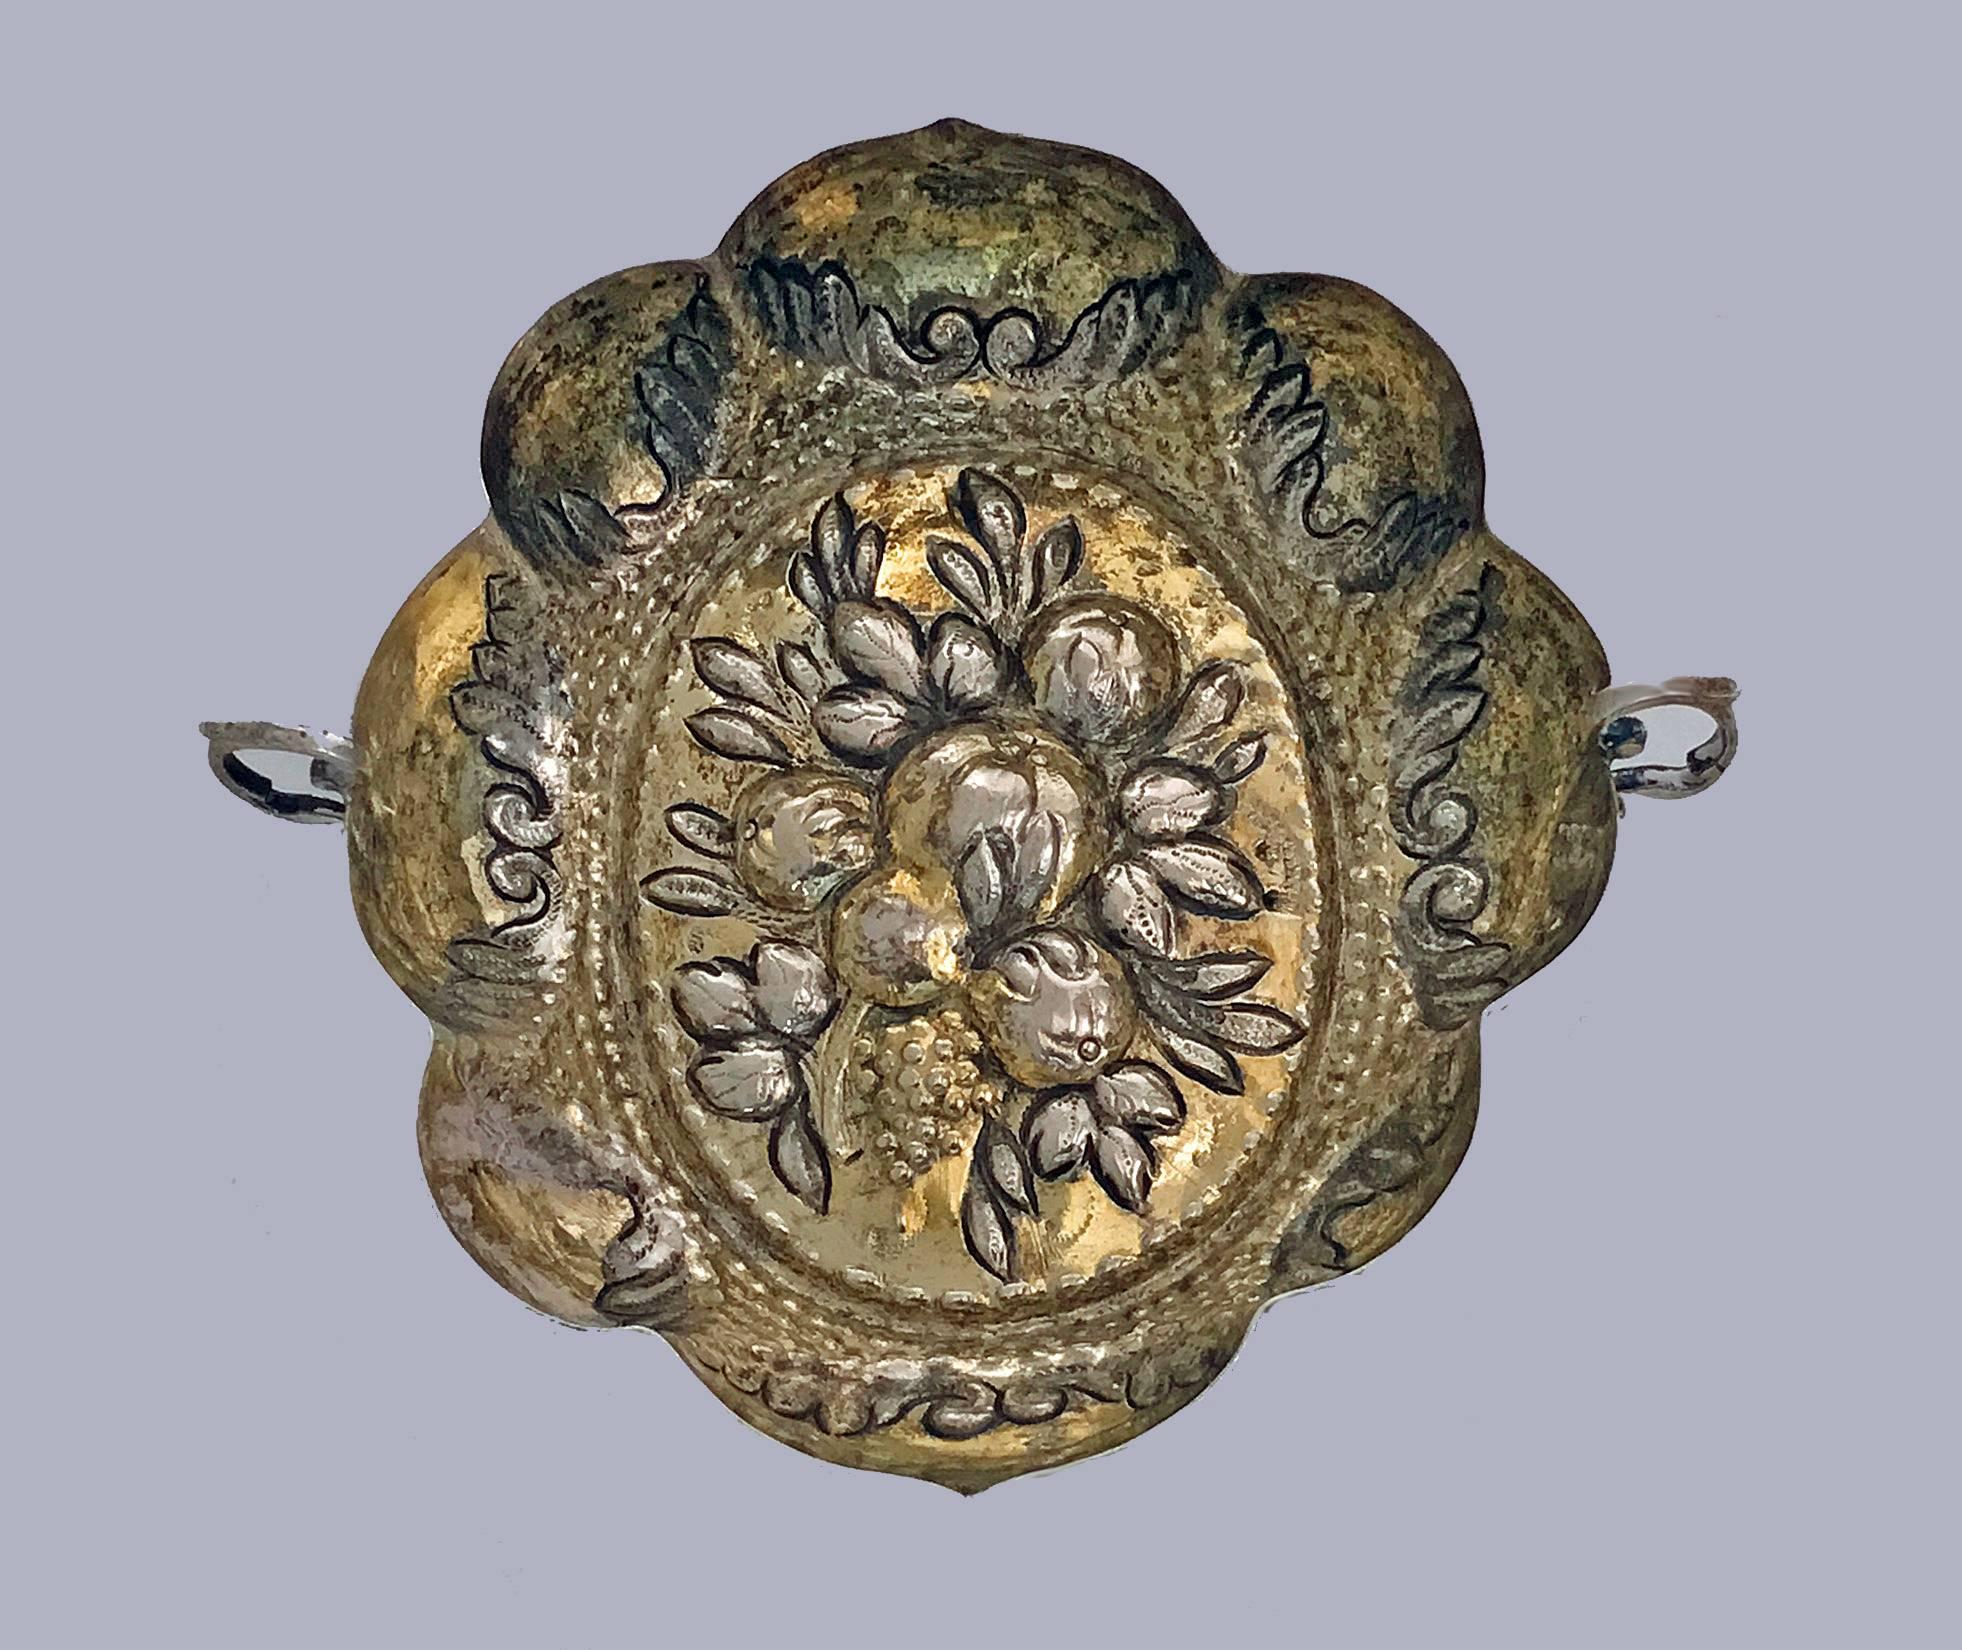 German 17th century parcel-gilt Sweetmeat Dish, Augsburg, circa 1670, Balthasar Haydt. Shaped oval and embossed with central foliage, cast side handles. Original interior gilding and gilt top on the outside. Weight: 87.25 grams. Measures: Height 3